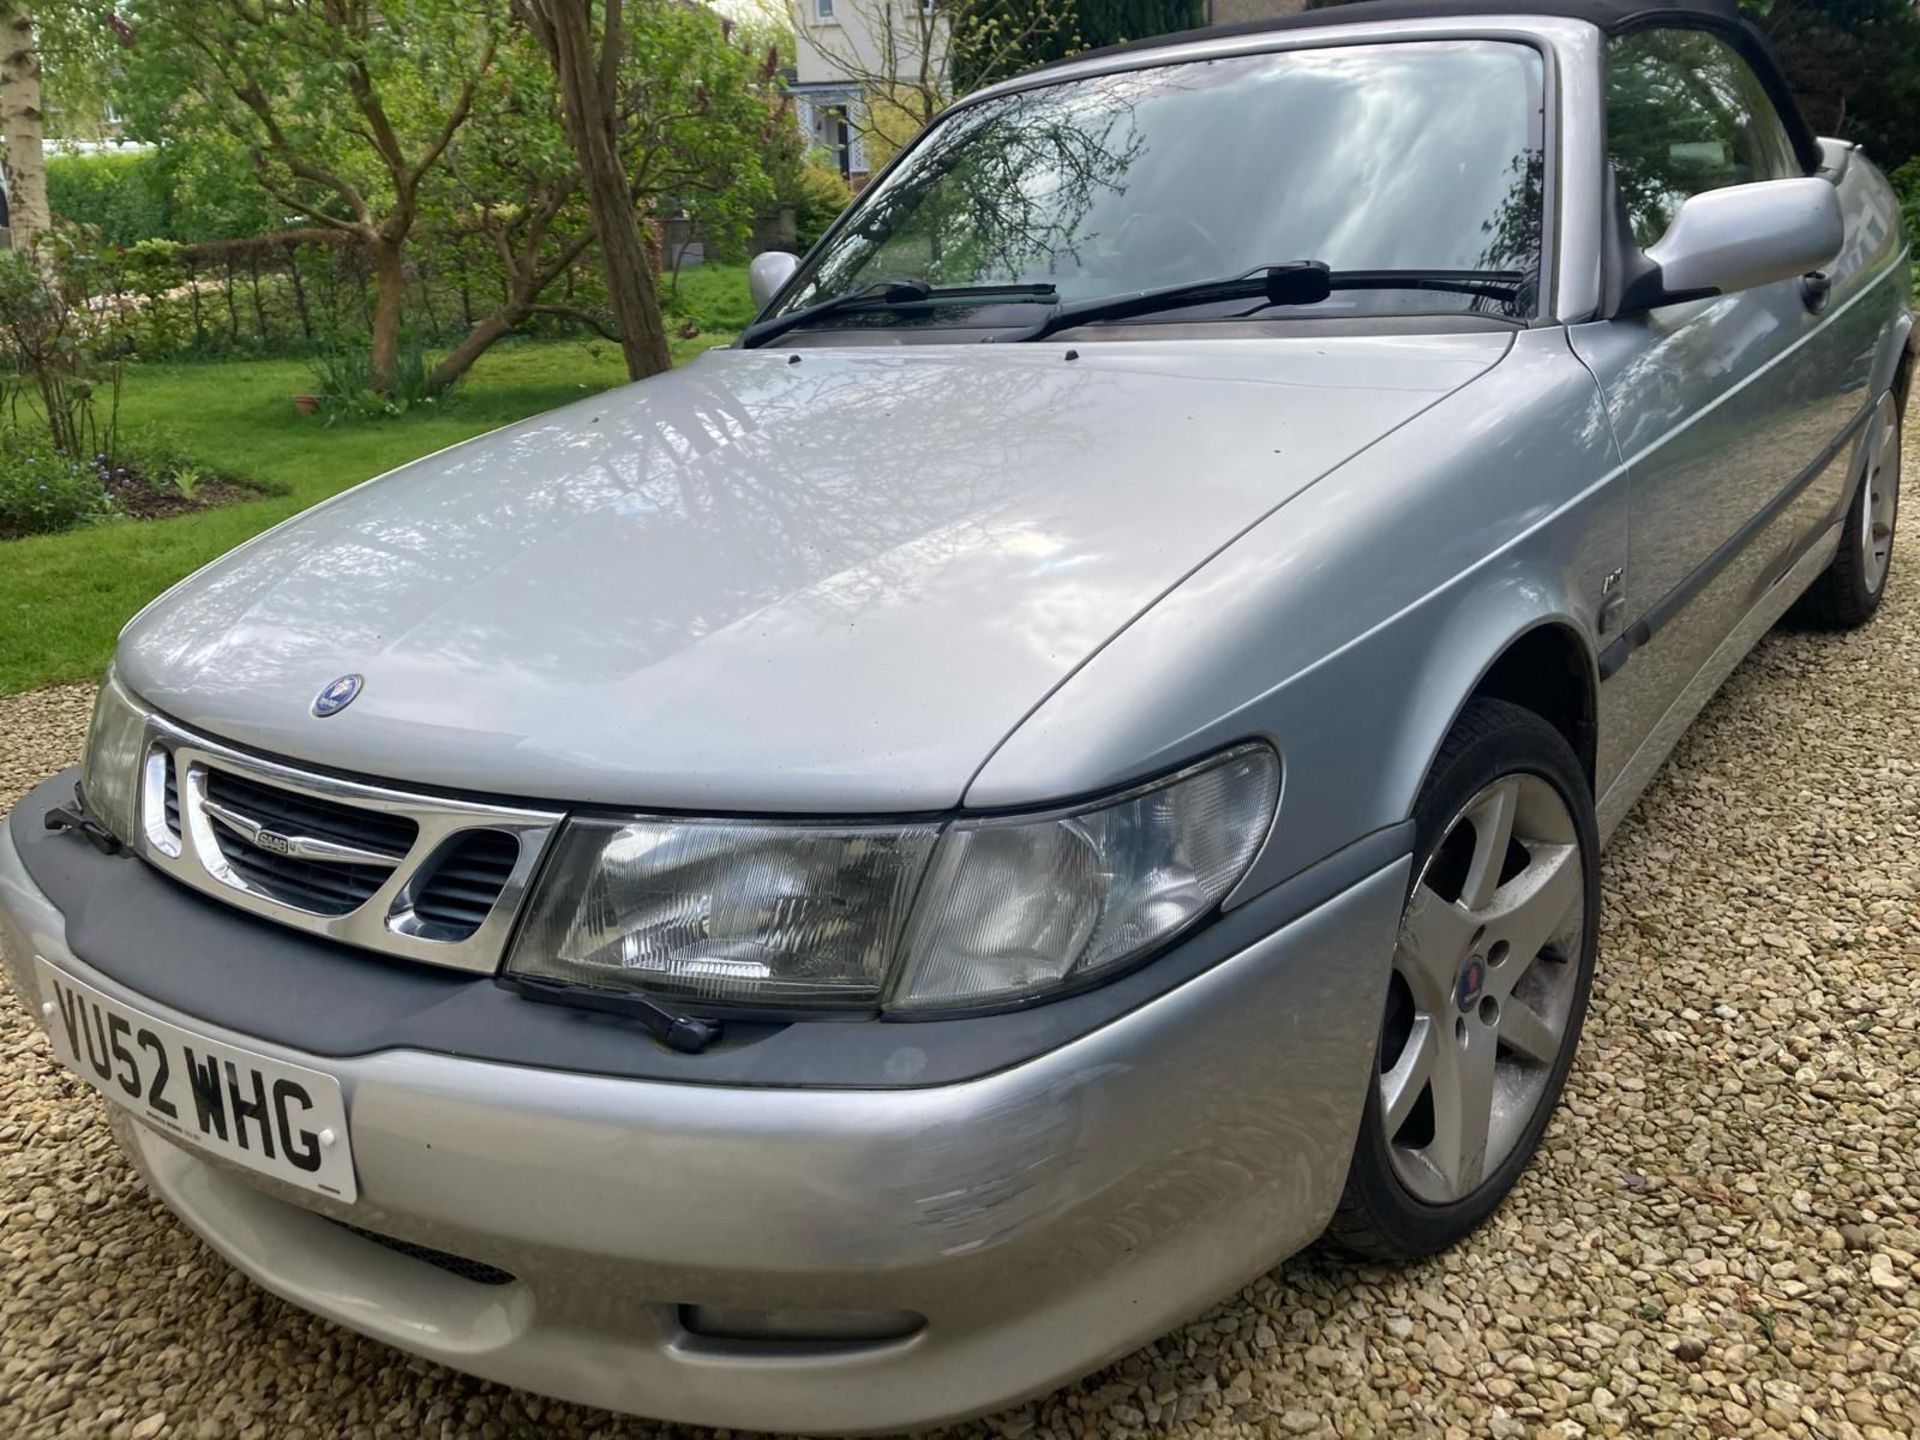 2002 Saab 9-3 Aero Convertible with 11 months MOT - Offered at No Reserve - Image 2 of 24